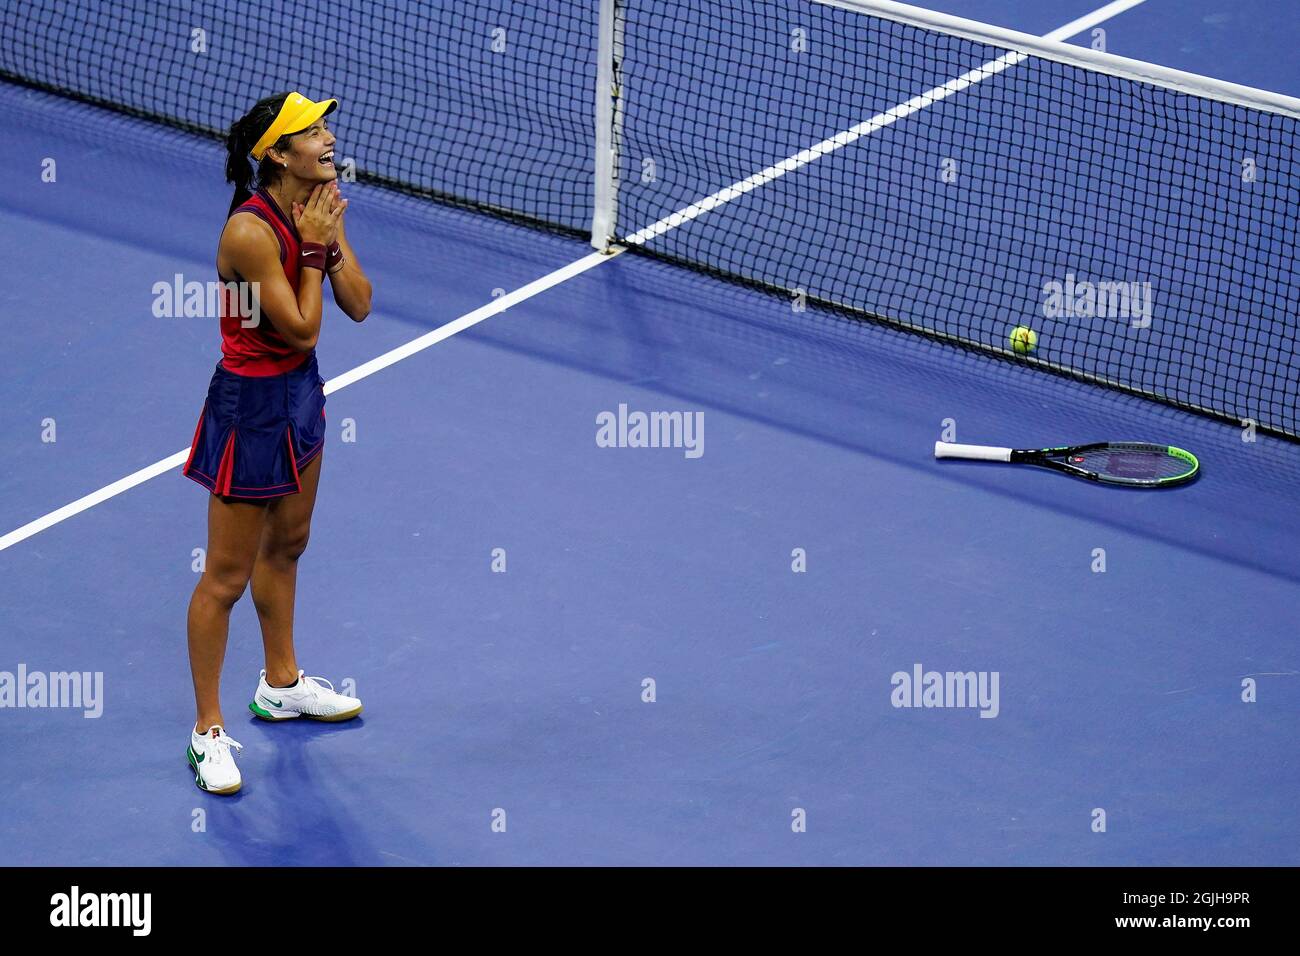 Emma Raducanu, of Great Britain, reacts after defeating Maria Sakkari, of Greece, during the semifinals of the US Open tennis championships, Thursday, Sept. 9, 2021, in New York. (AP Photo/Seth Wenig) Stock Photo